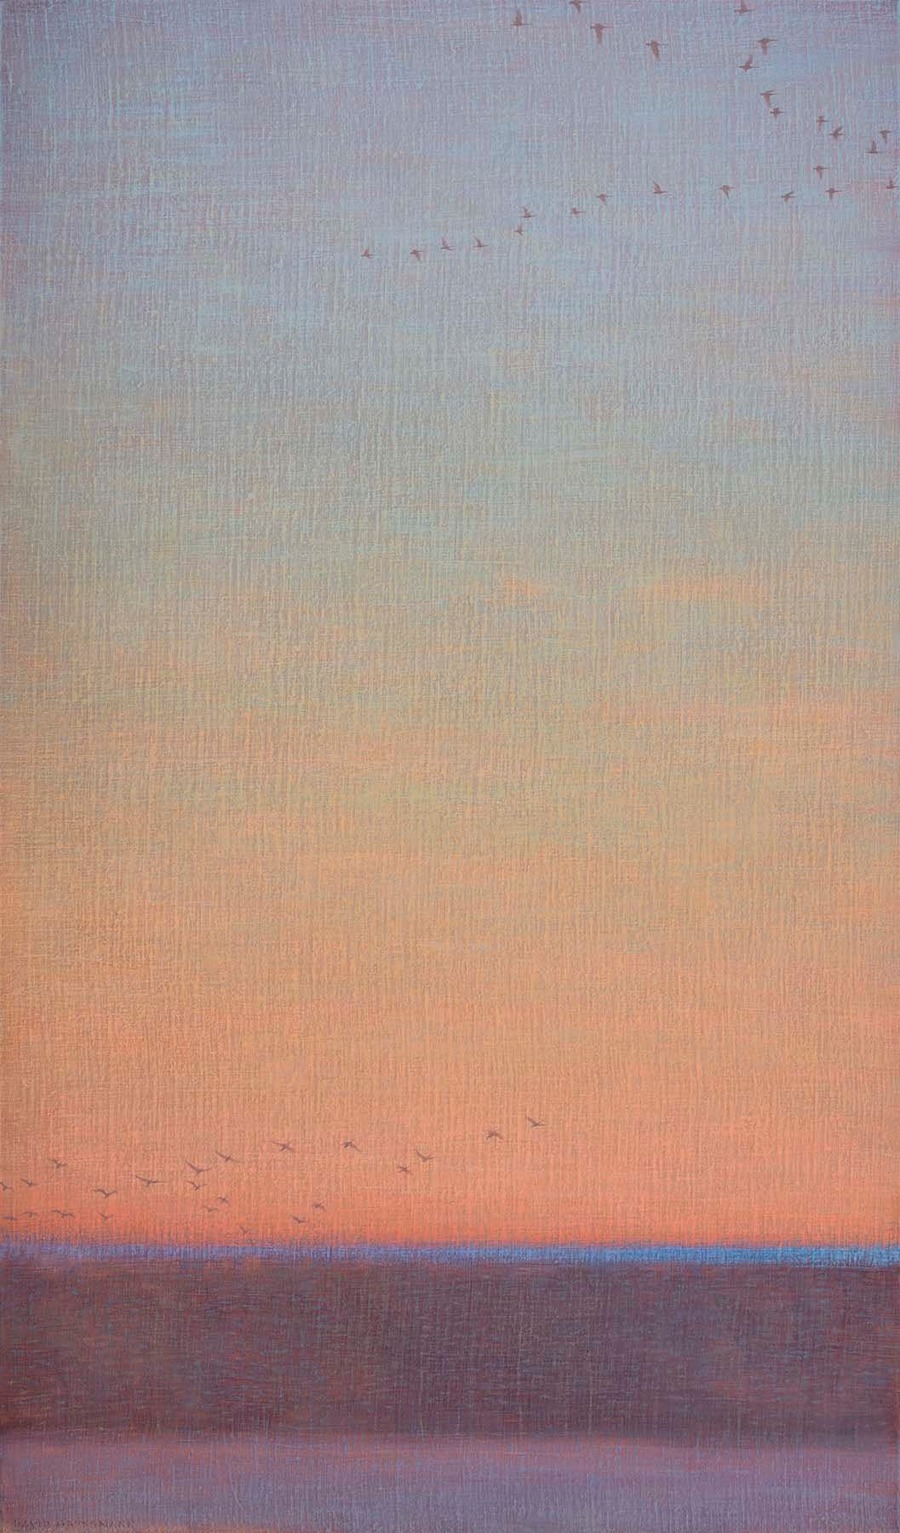 David Grossmann - Evening with Forming Patterns